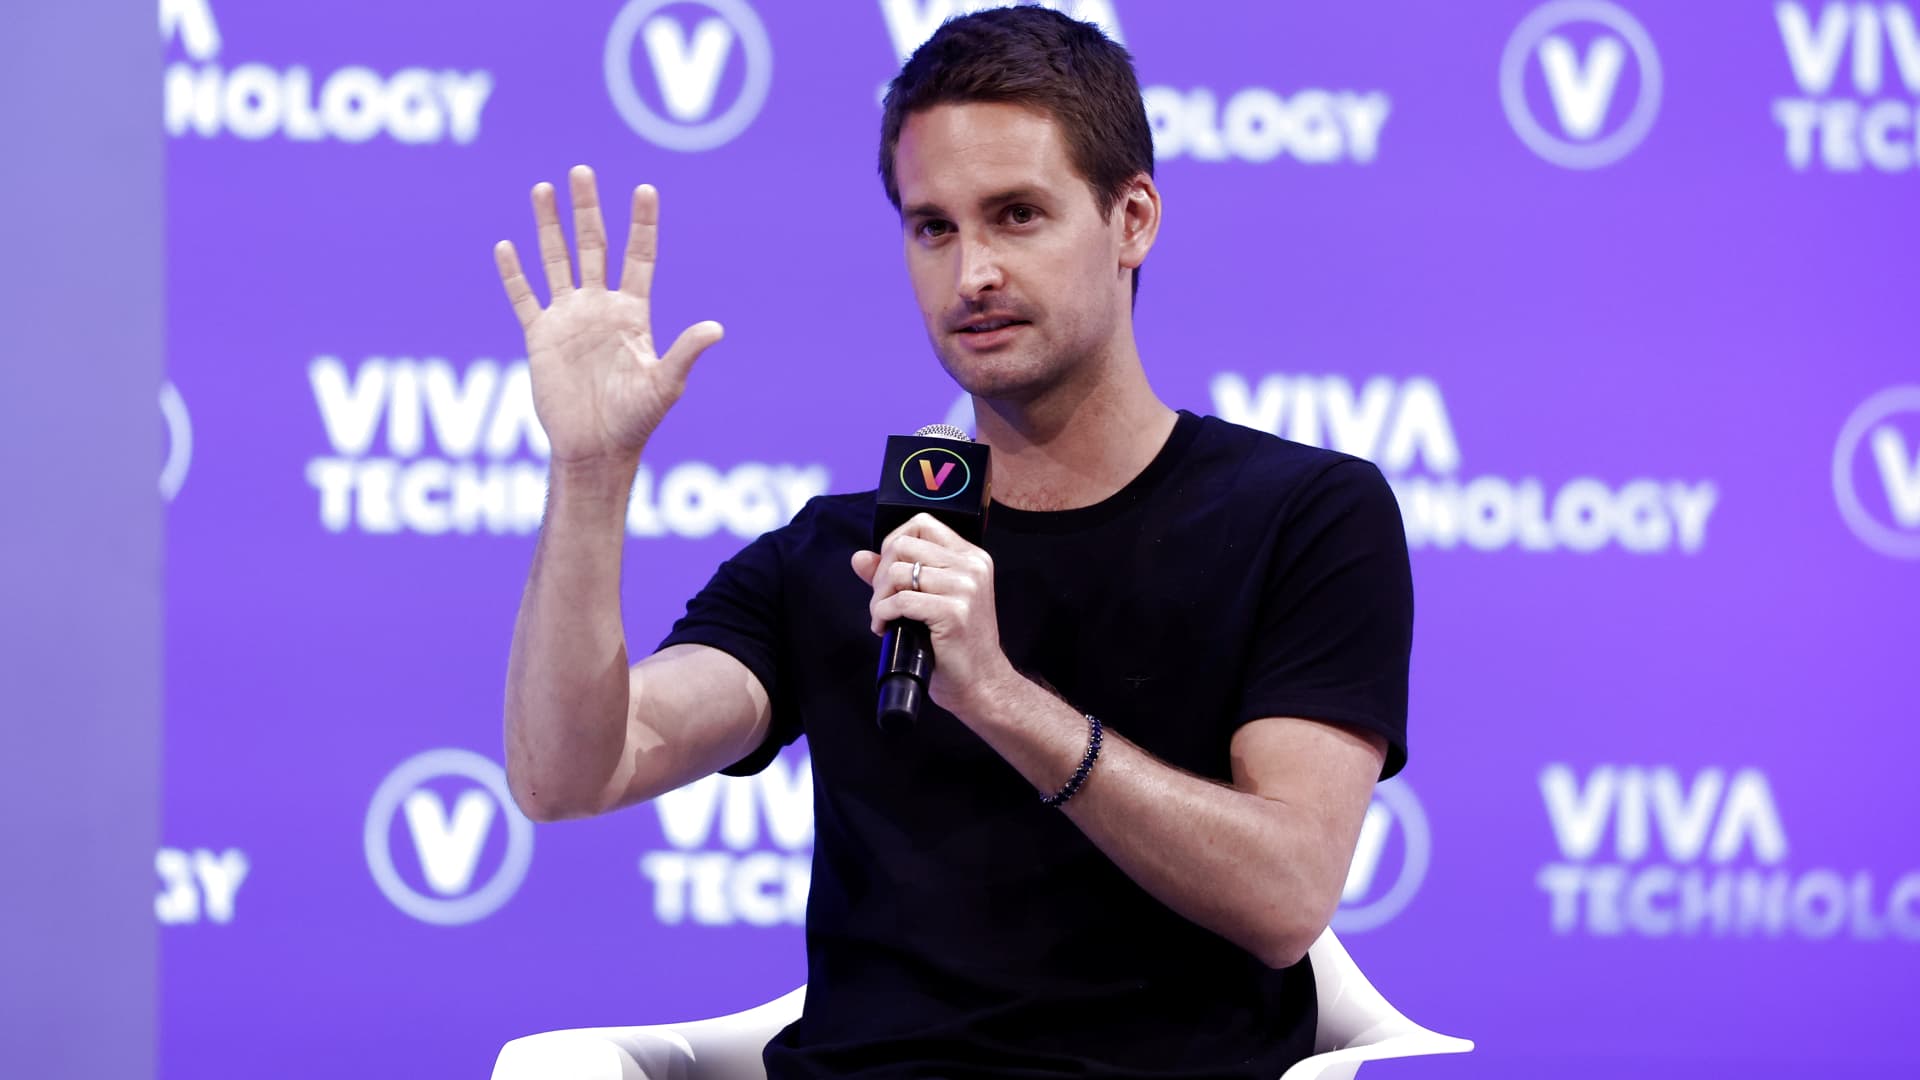 Snap plunges 30% on revenue miss and light steering, as Middle East conflict creates 'headwind'